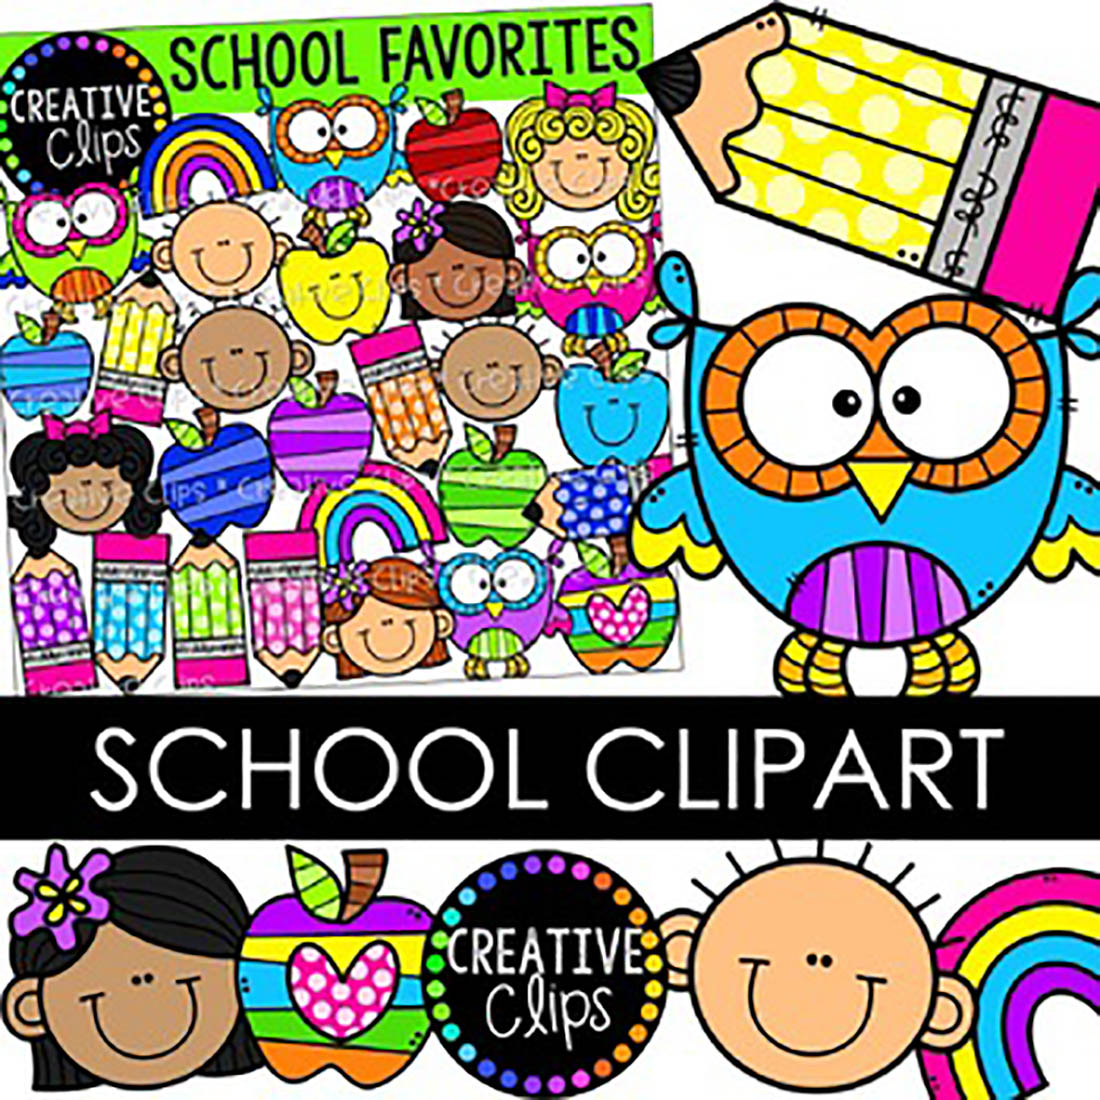 Back to School Clipart, School Bulletin Board, Coloring Pages and Door Decor cover image.